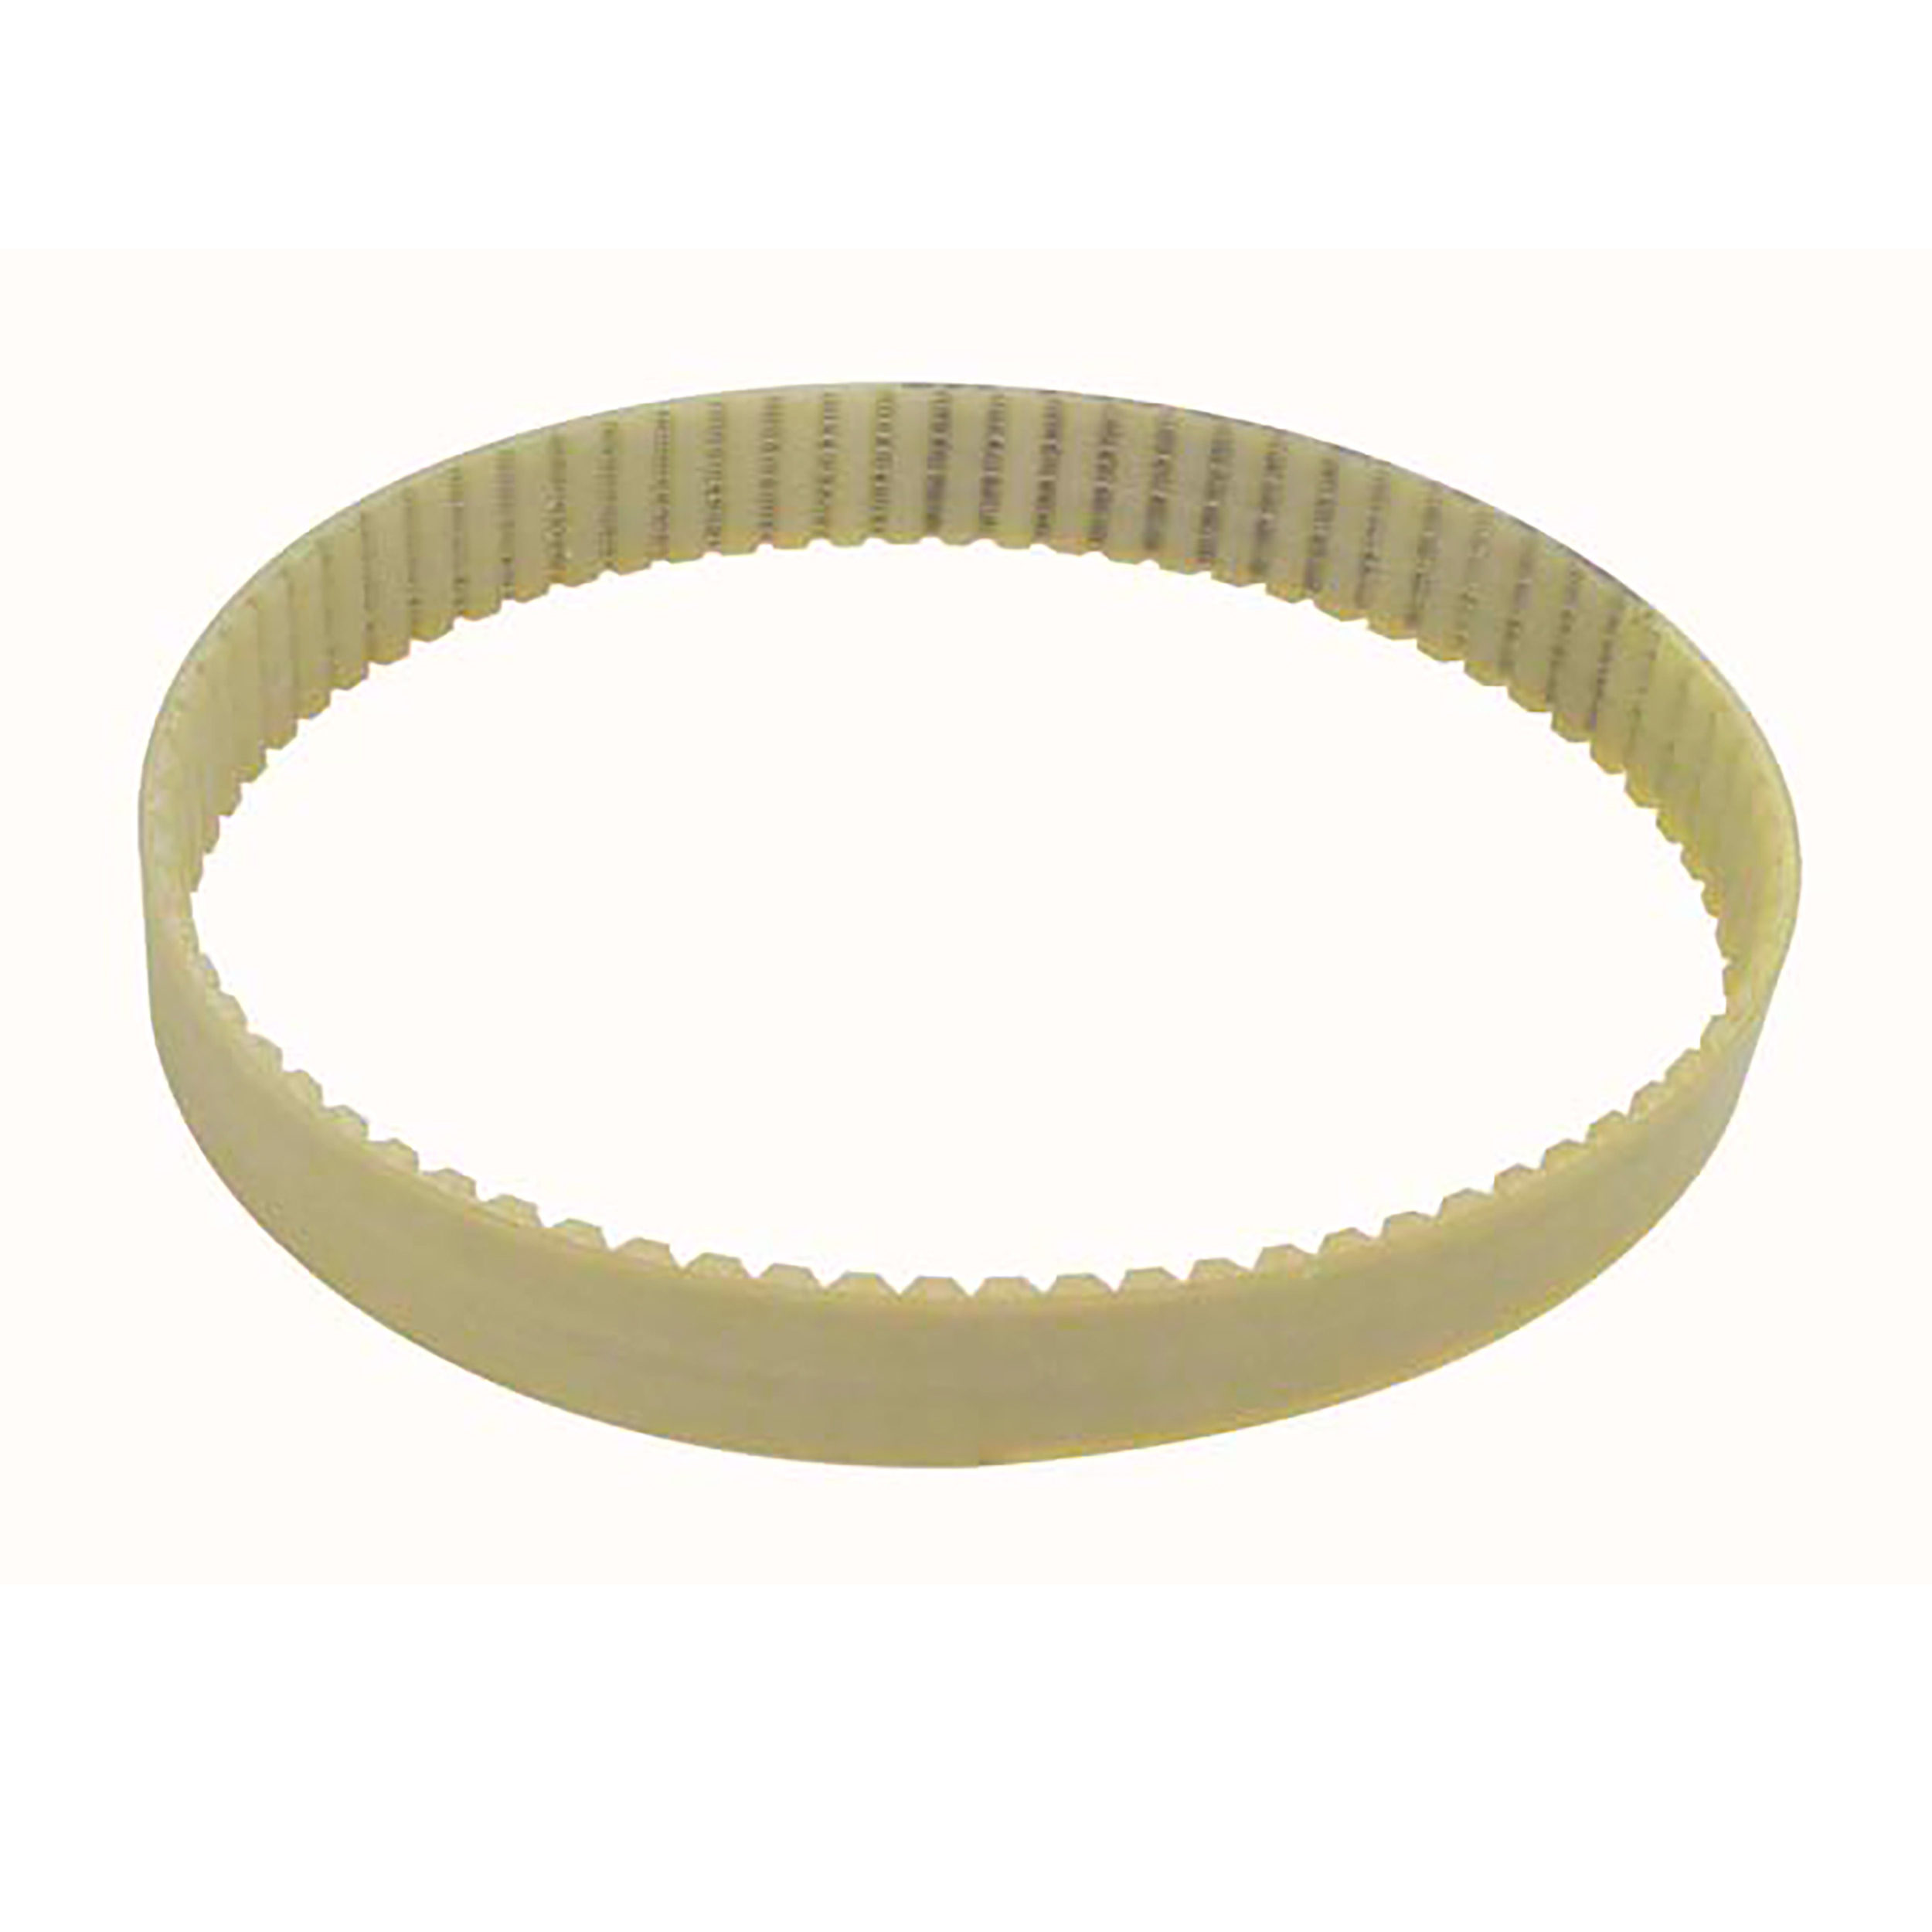 AT type timing belt - AT5 Steel cored polyurethane - 25mm - AT